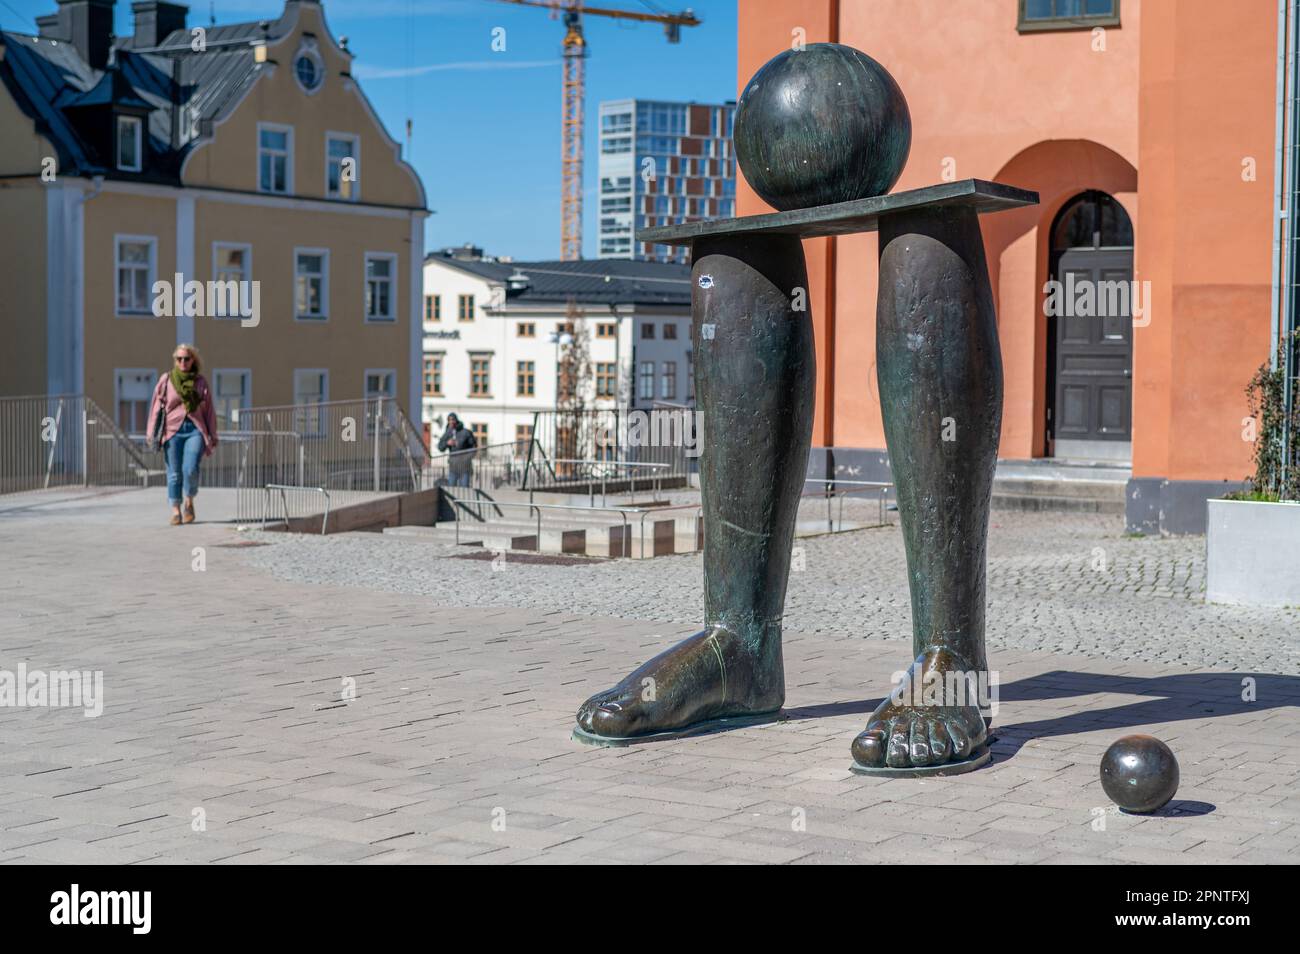 The Giant a part of a sculpture group “The Jester, The Giant and the Juggler” from 1974 by Owe Pellsjö in Norrköping, Sweden Stock Photo